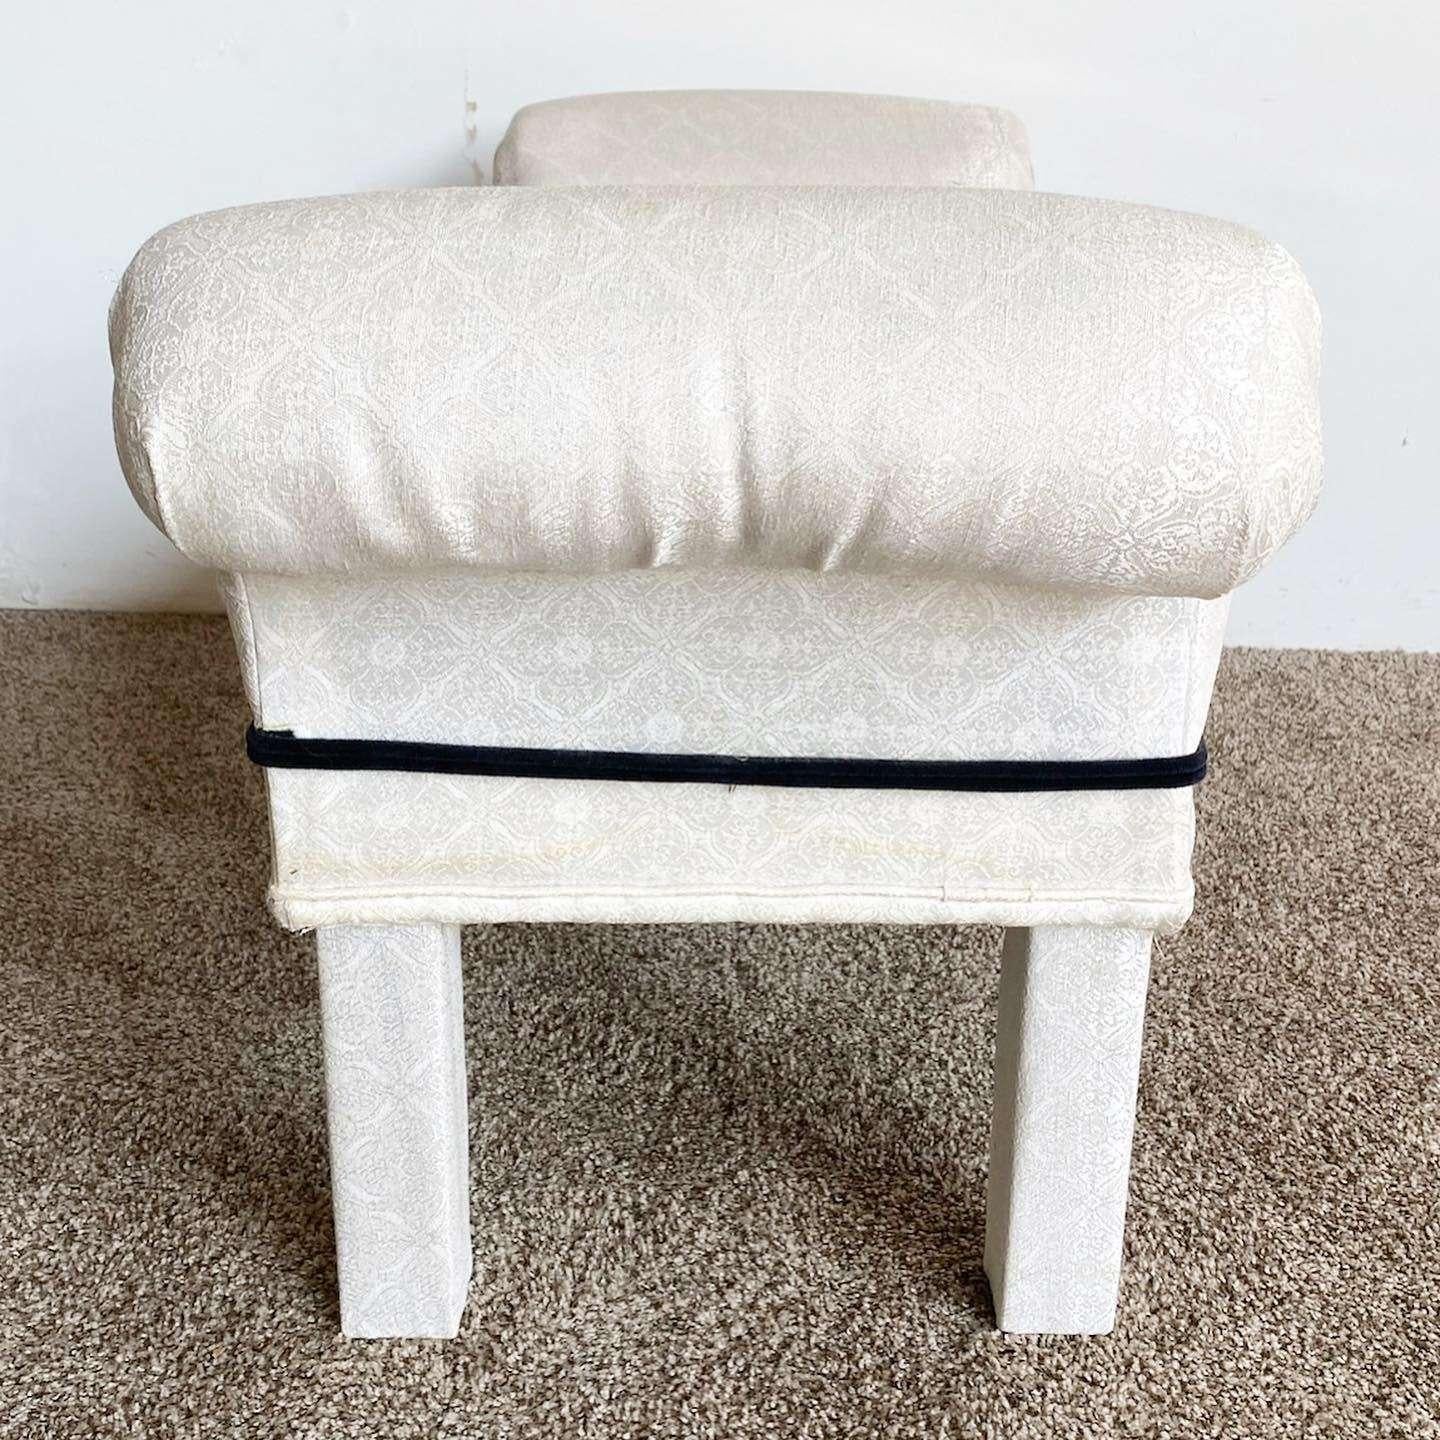 Fabric Post Modern White Flair Bench With Black Trim For Sale